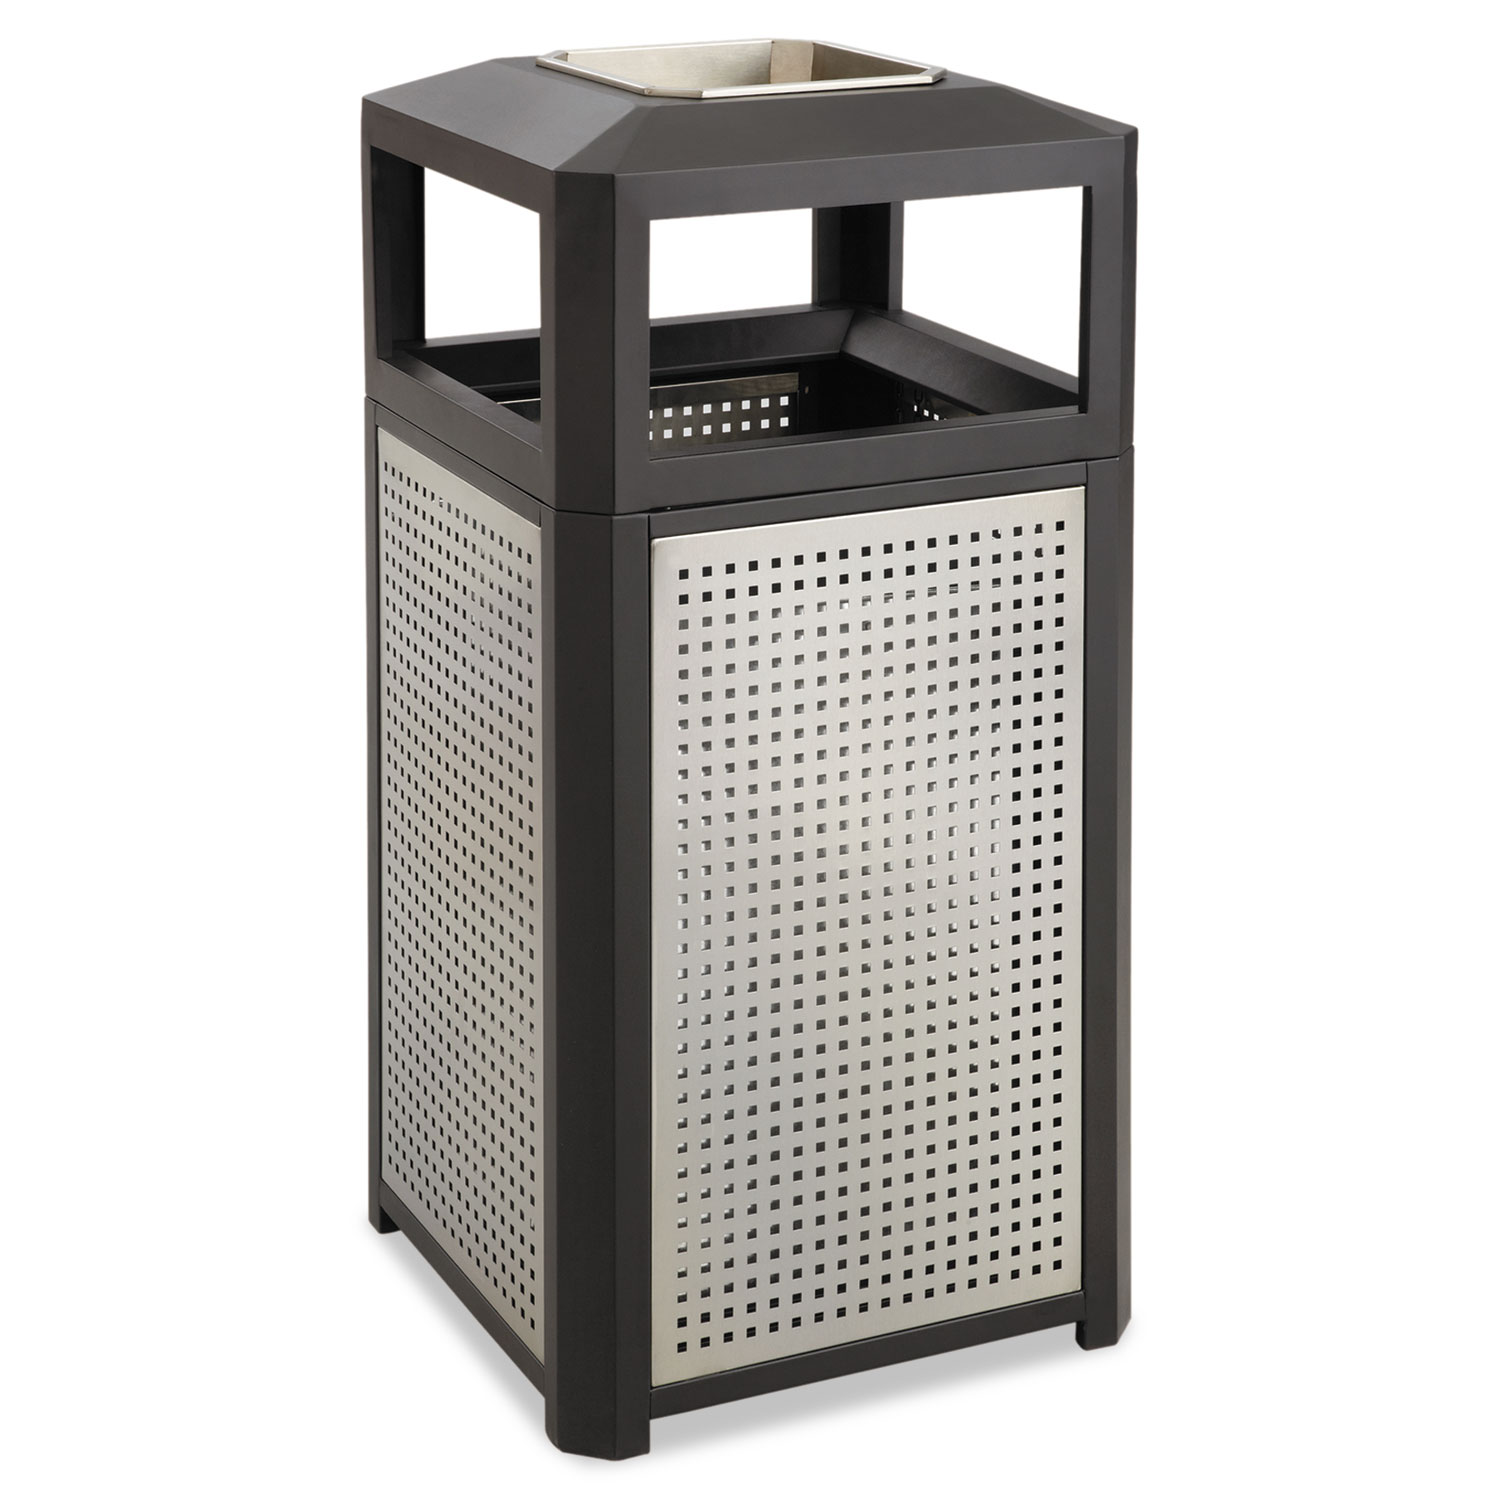 Ashtray-Top Evos Series Steel Waste Container, 15gal, Black